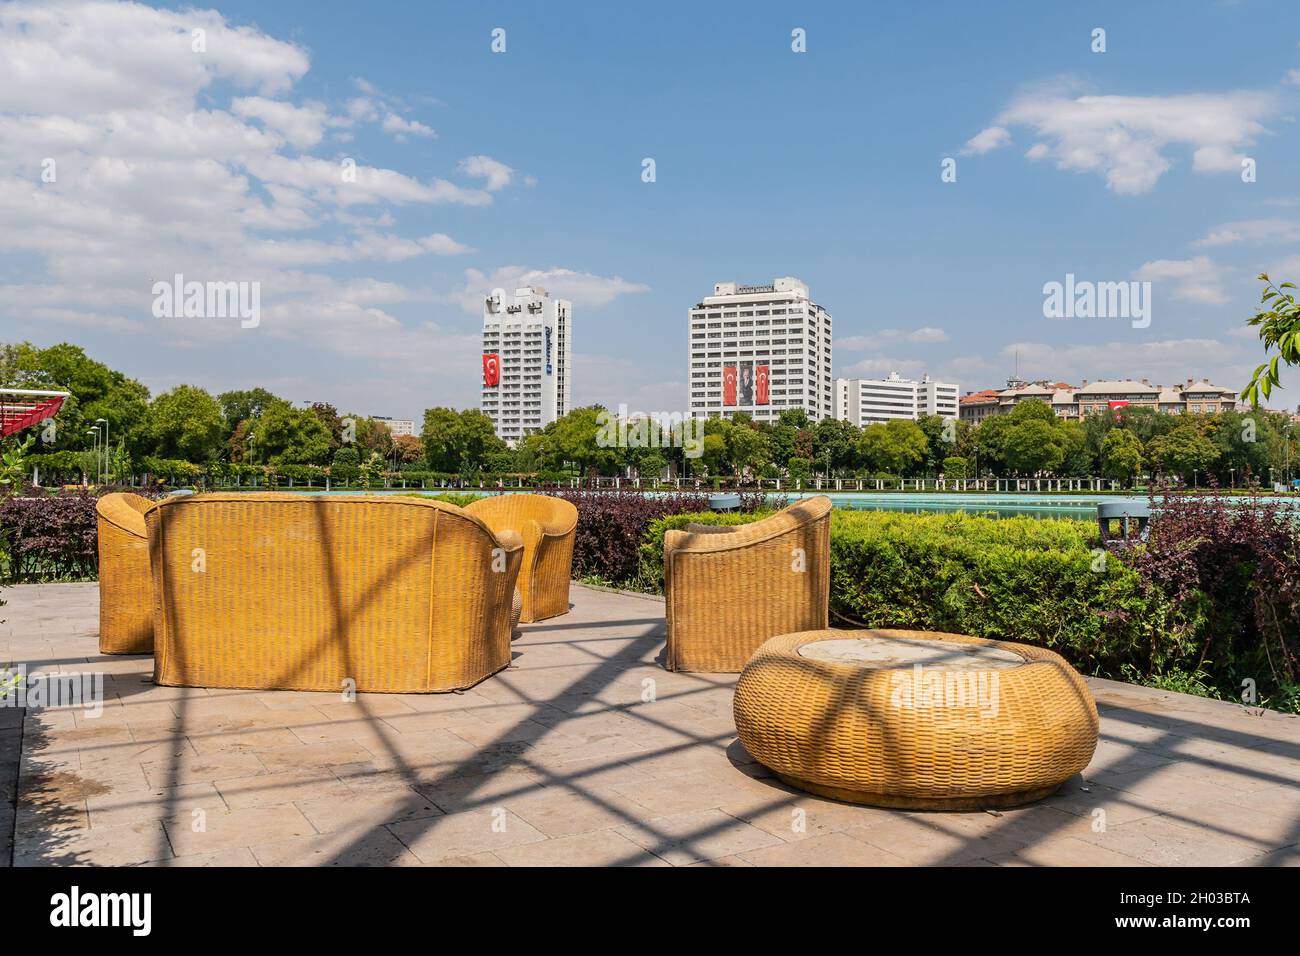 Ankara Genclik Park Breathtaking Picturesque View of Furniture on a Blue Sky Day in Summer Stock Photo